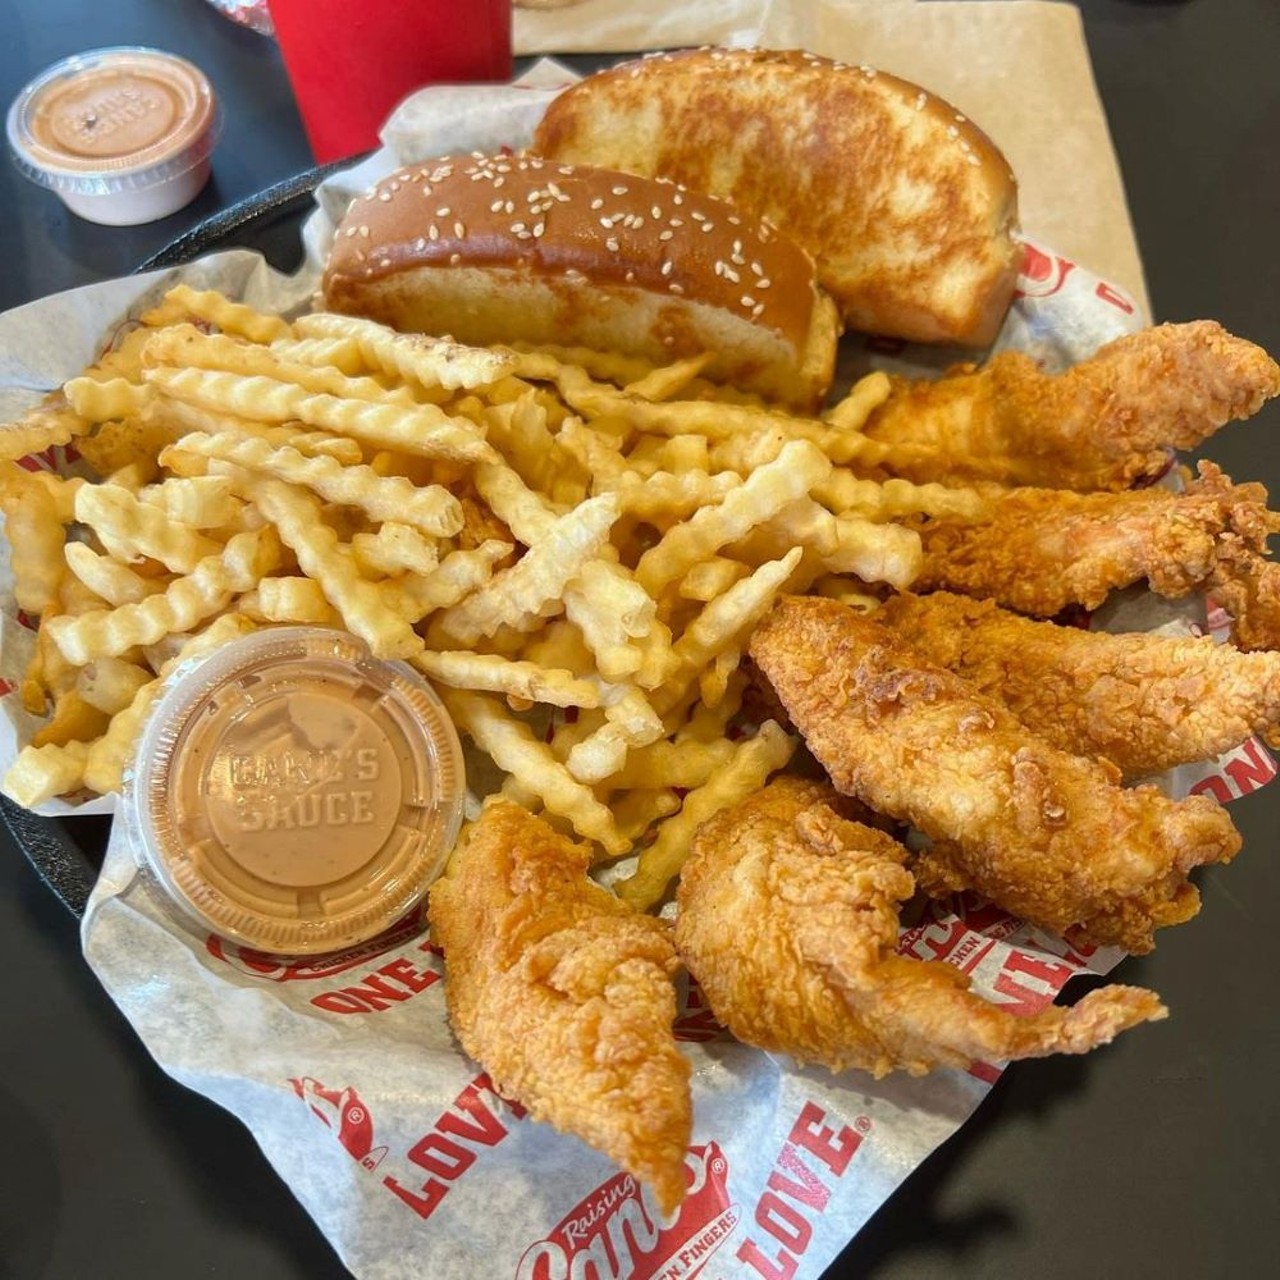 Raising Cane's
2525 Gulf to Bay Blvd., Clearwater,(727) 431-1408
Popular Louisiana-based chicken tender chain, Raising Canes made its Bay debut this year serving up crinkle fries, chicken sandwiches, and of course, tenders. The spot also has coleslaw and Texas toast for sides and don't forget the Cane's dipping sauce for your tenders.
Photo via  Raising Caines/Facebook